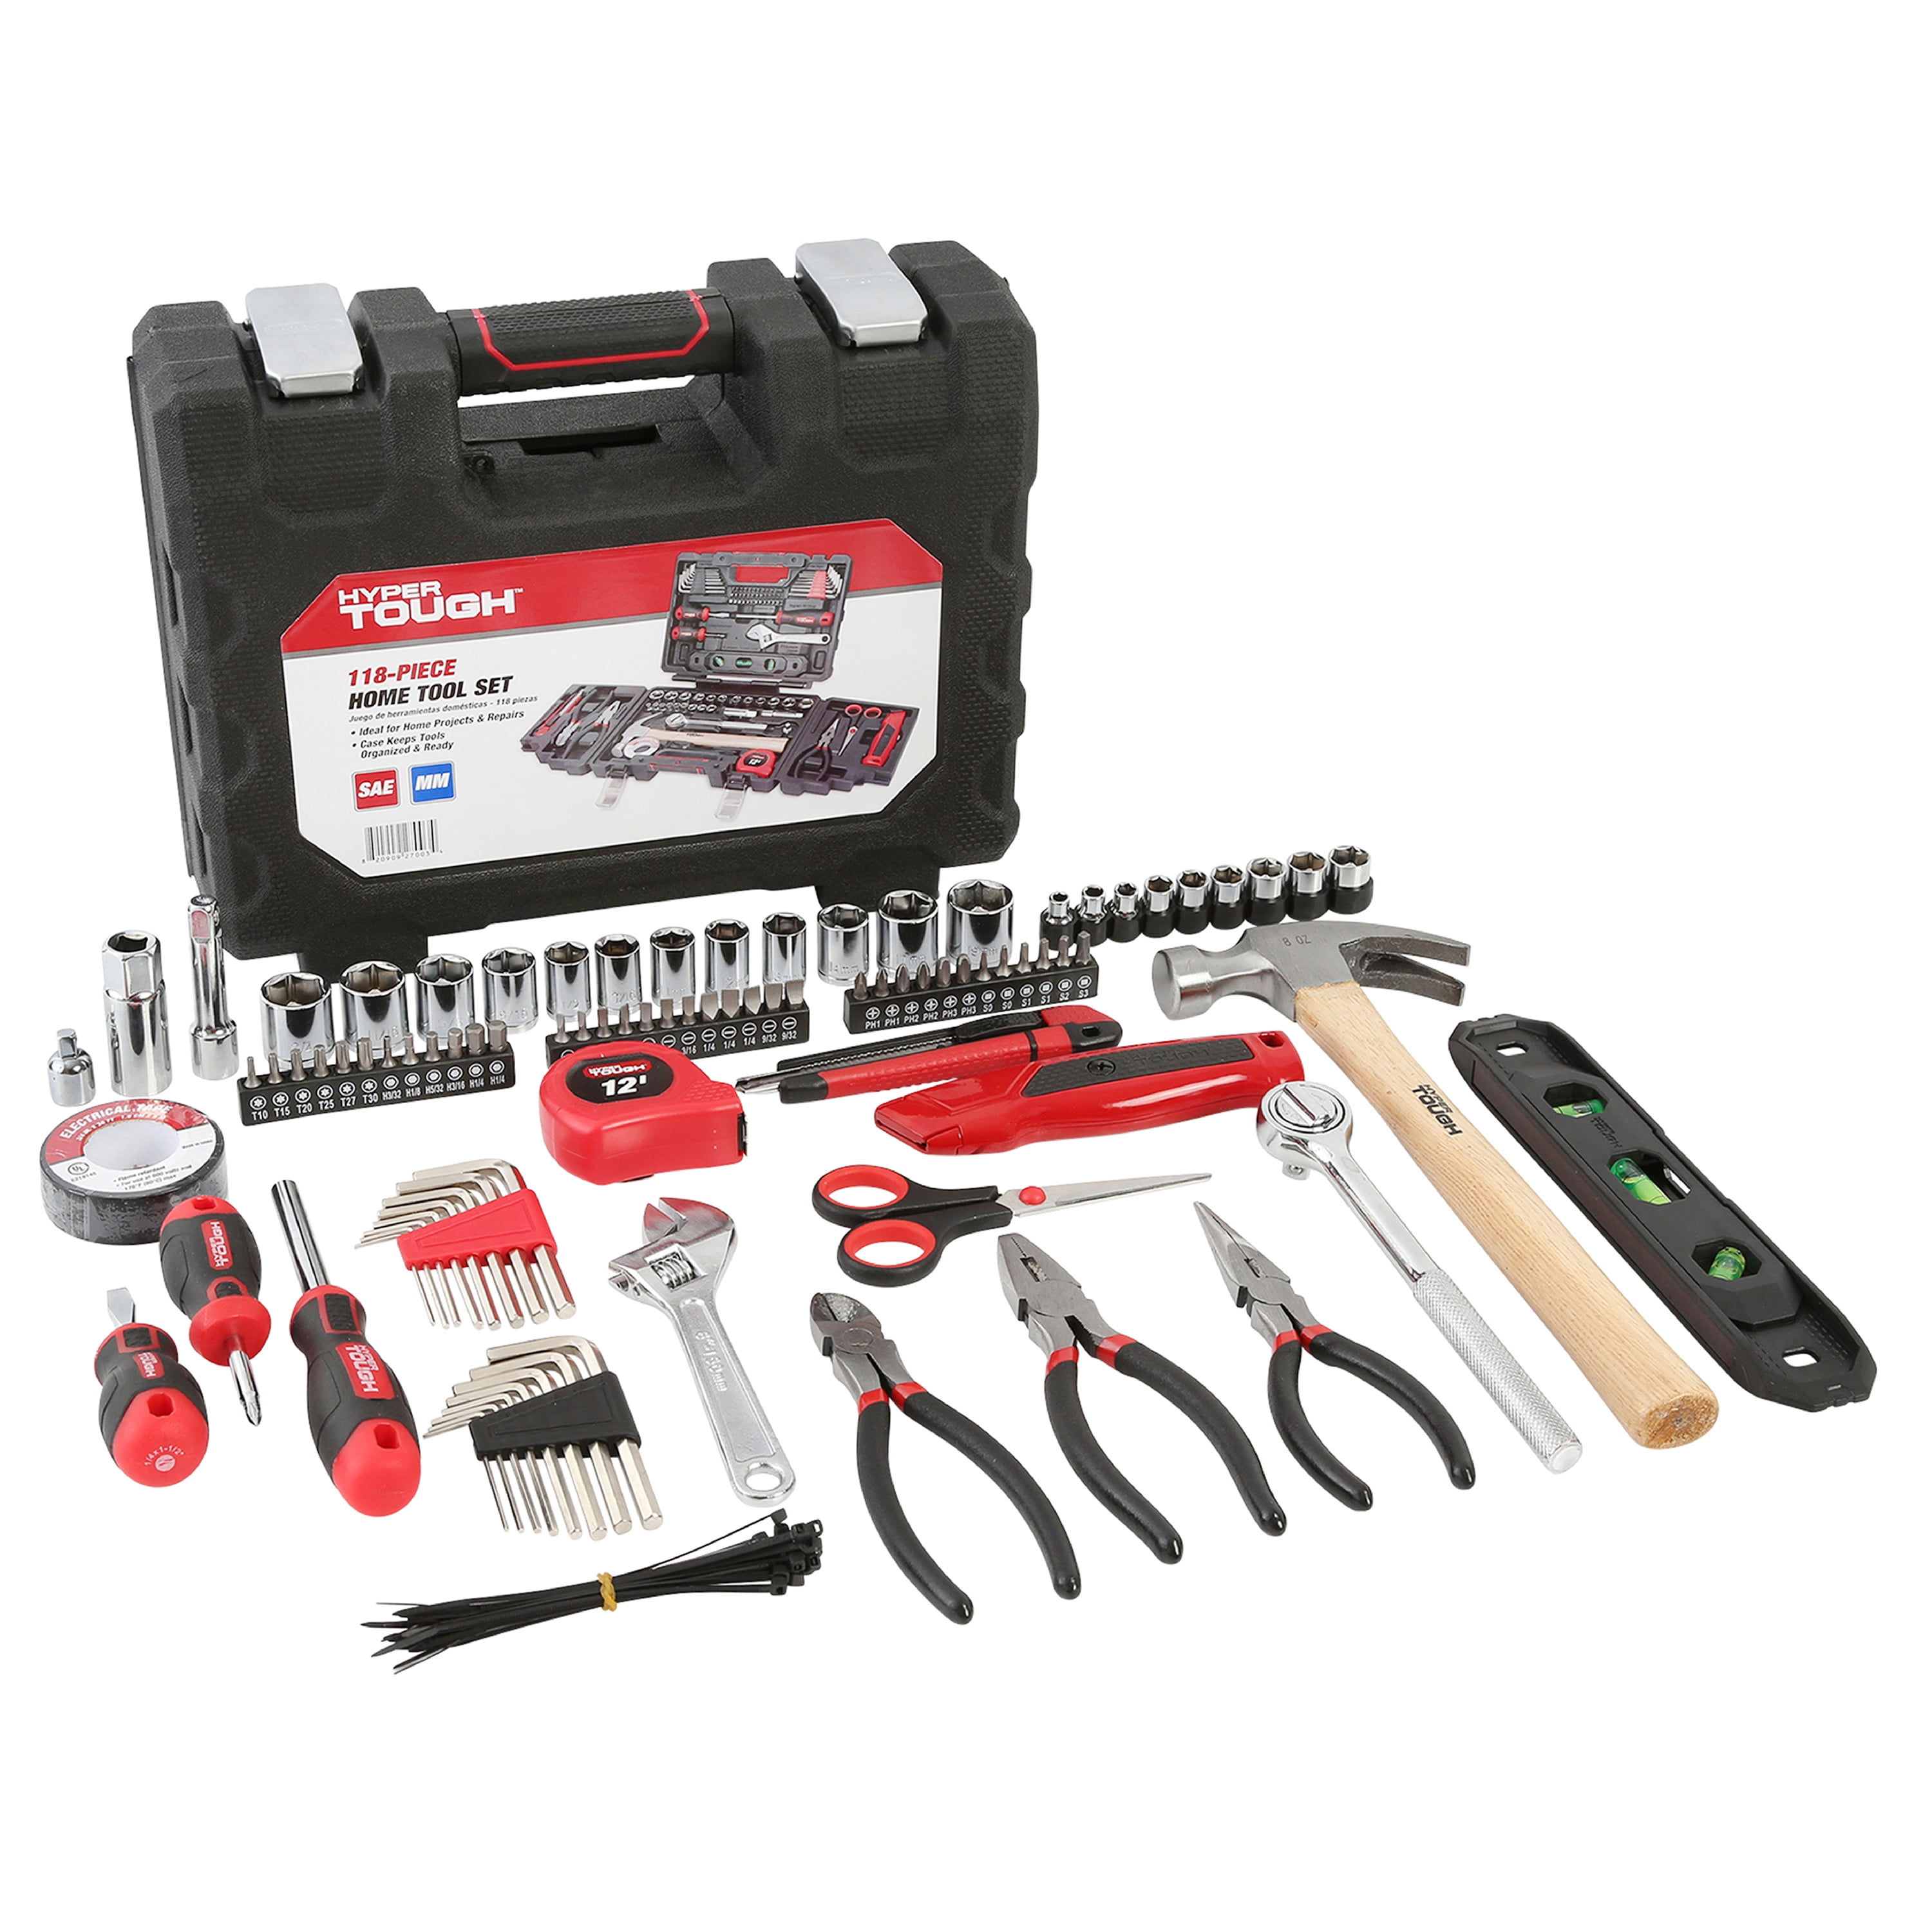 Hyper Tough Ht 51-piece Auto And Motorcycle Tool Kit 